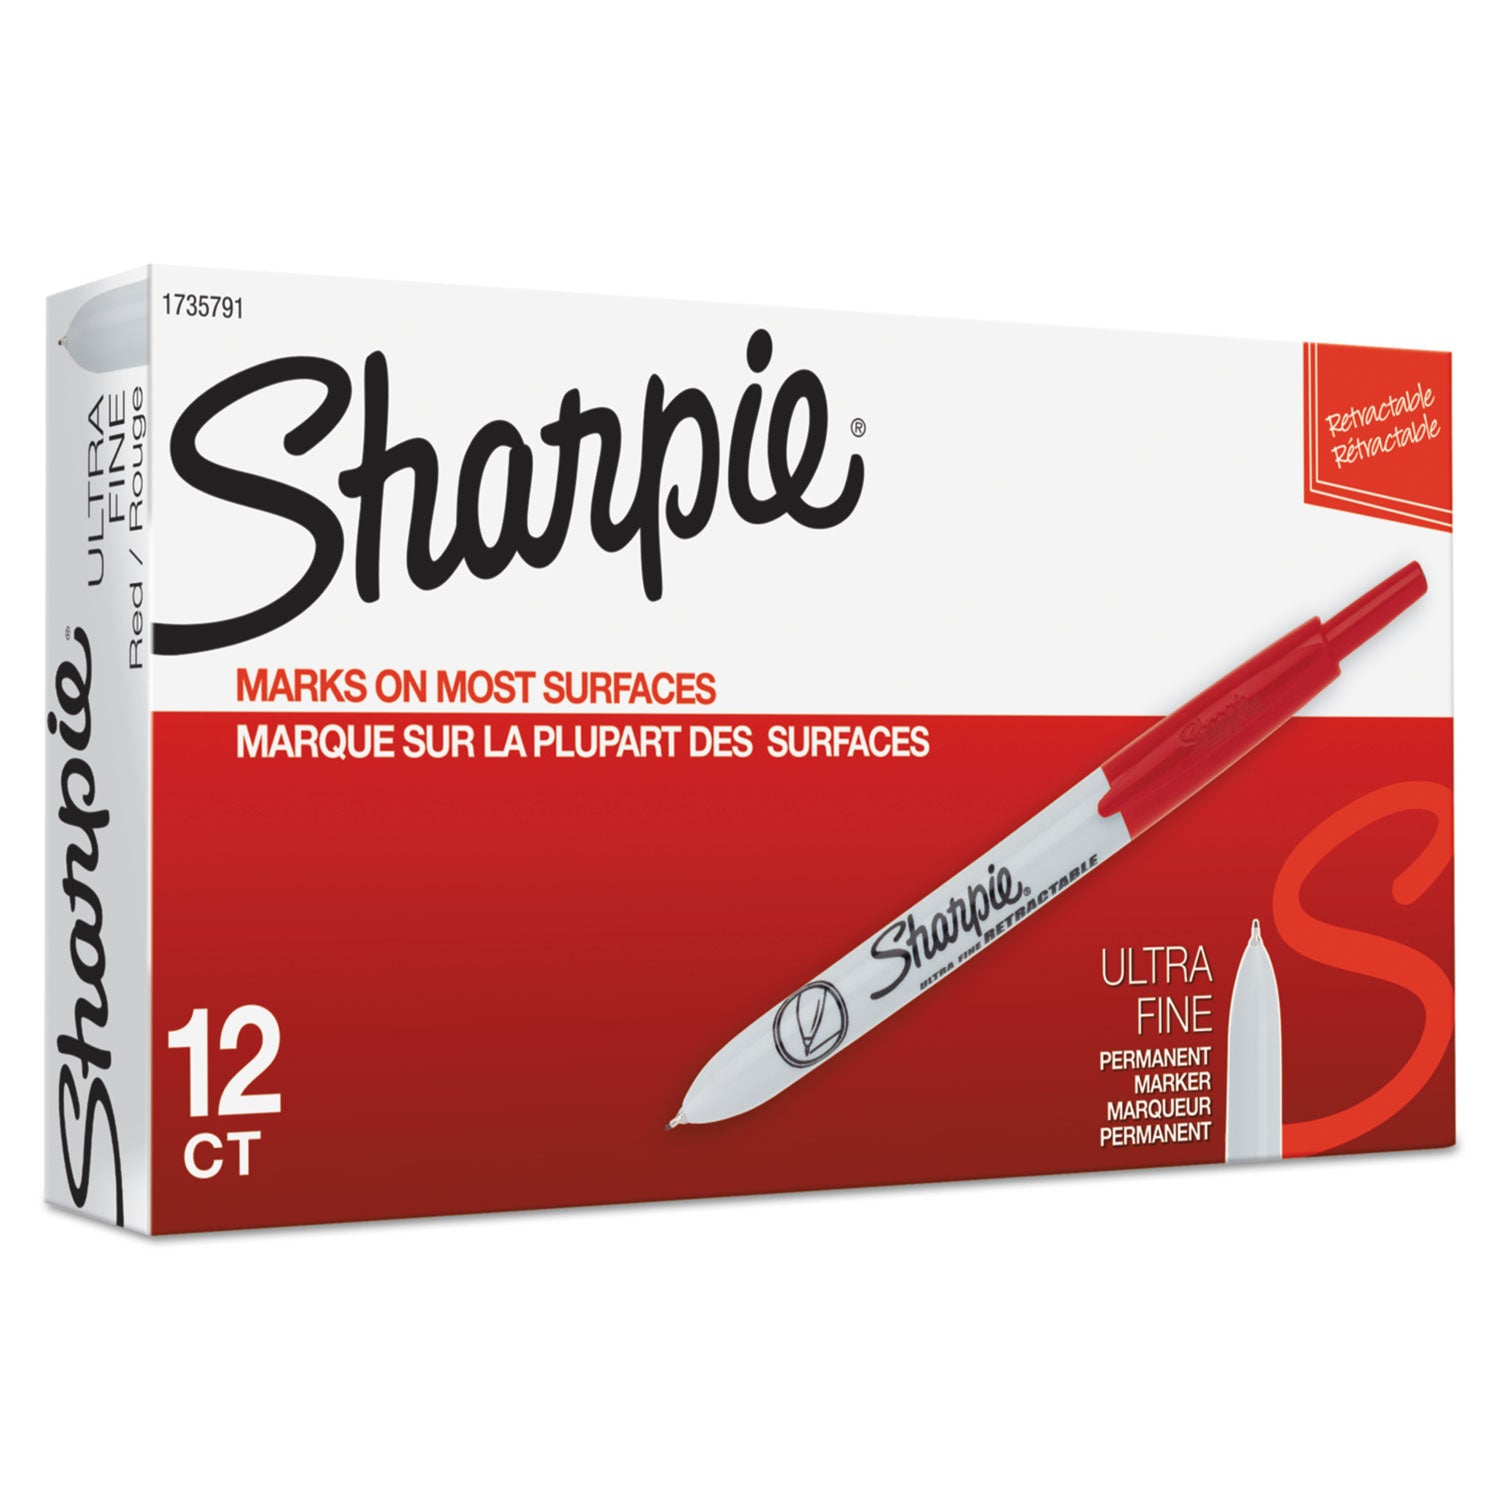 Retractable Permanent Marker, Extra-Fine Needle Tip, Red - 